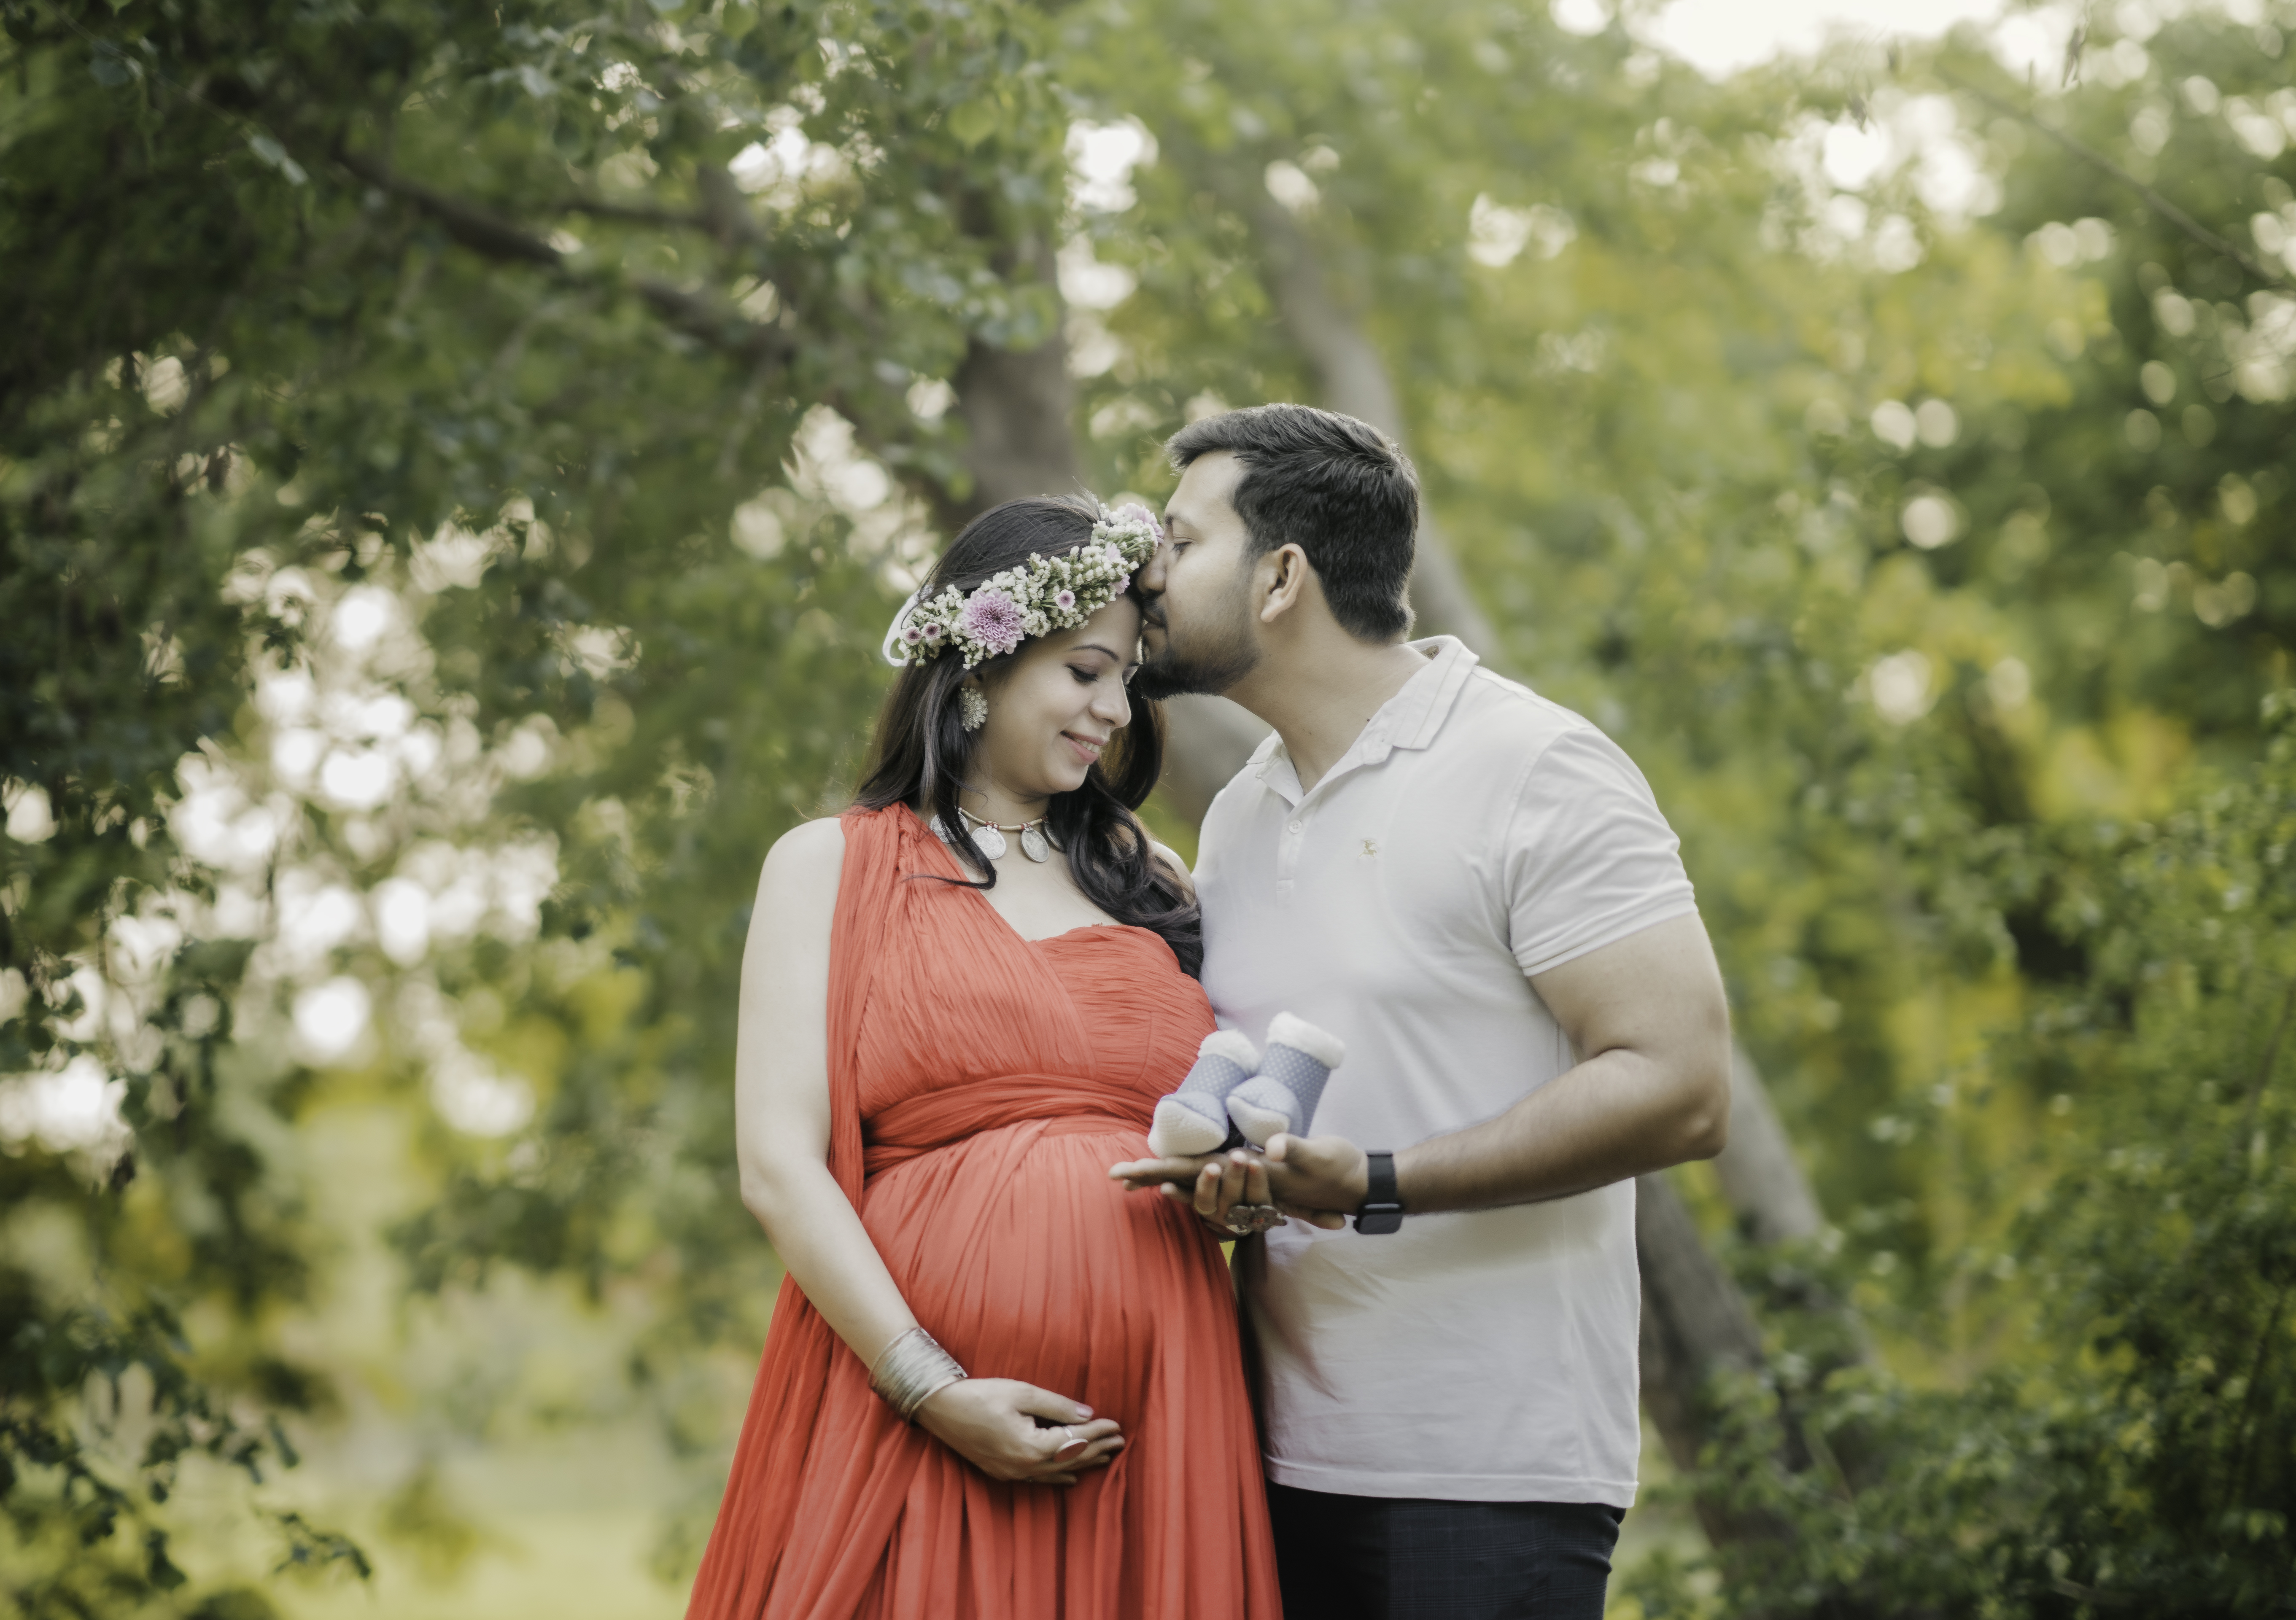 Maternity Photography | 10 Reasons To Get Pregnancy Photos